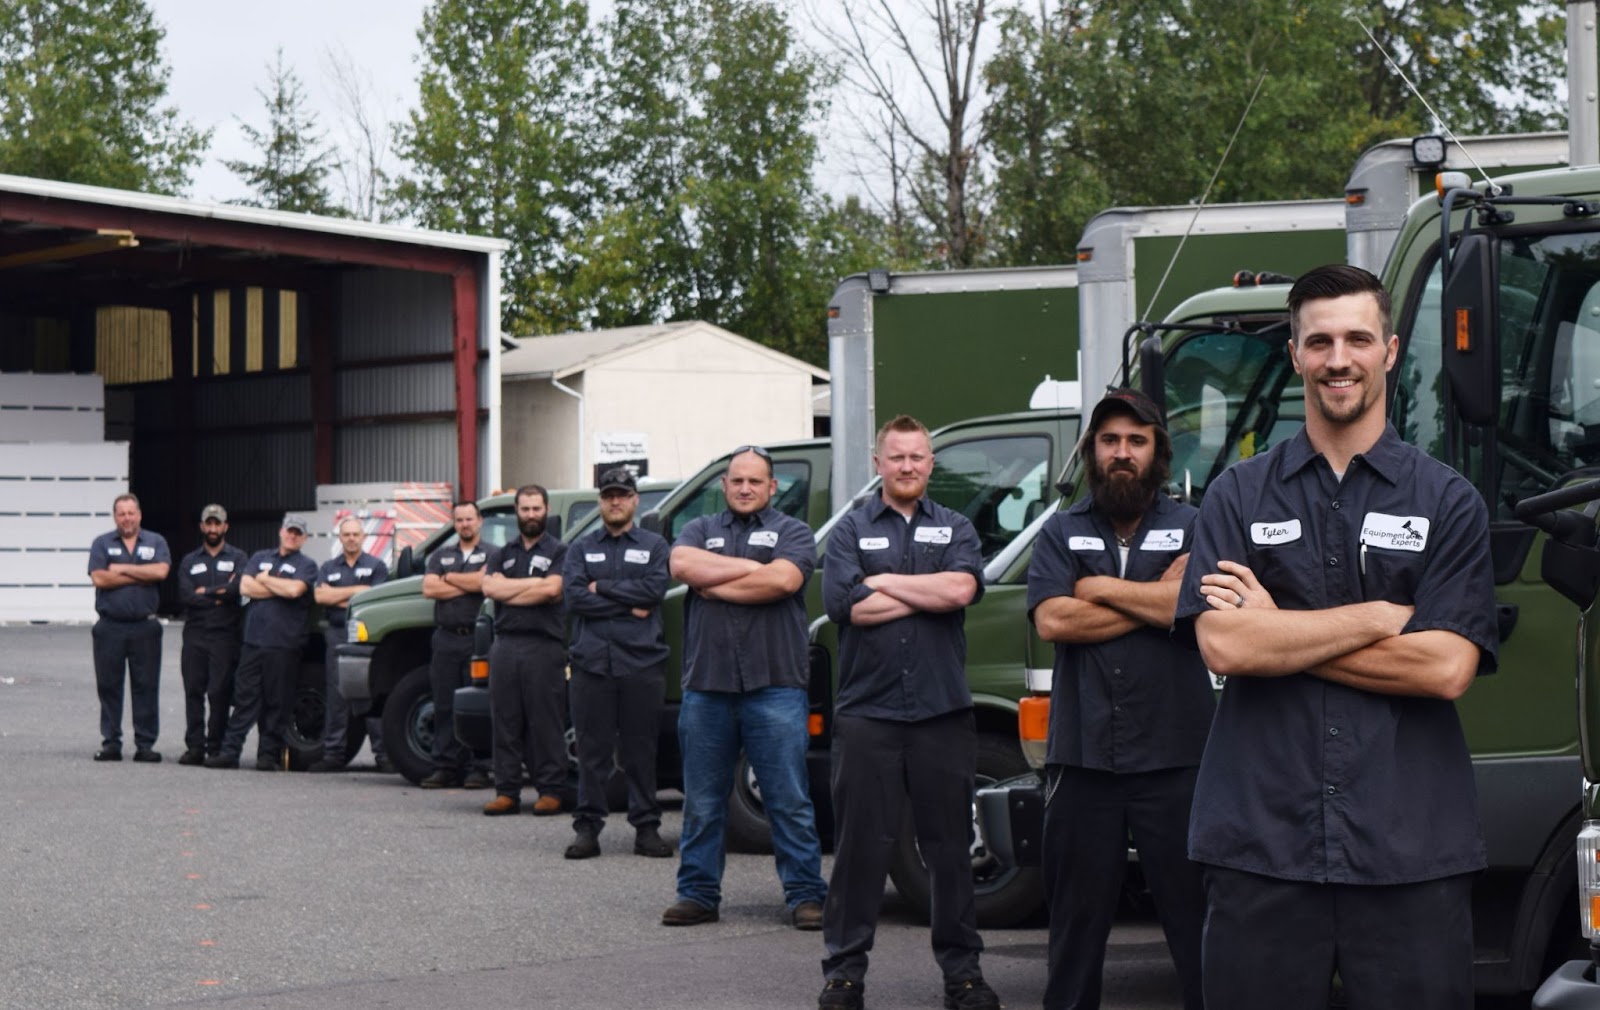 The Equipment Experts forklift and technician team with crossed arms and smiling at the camera